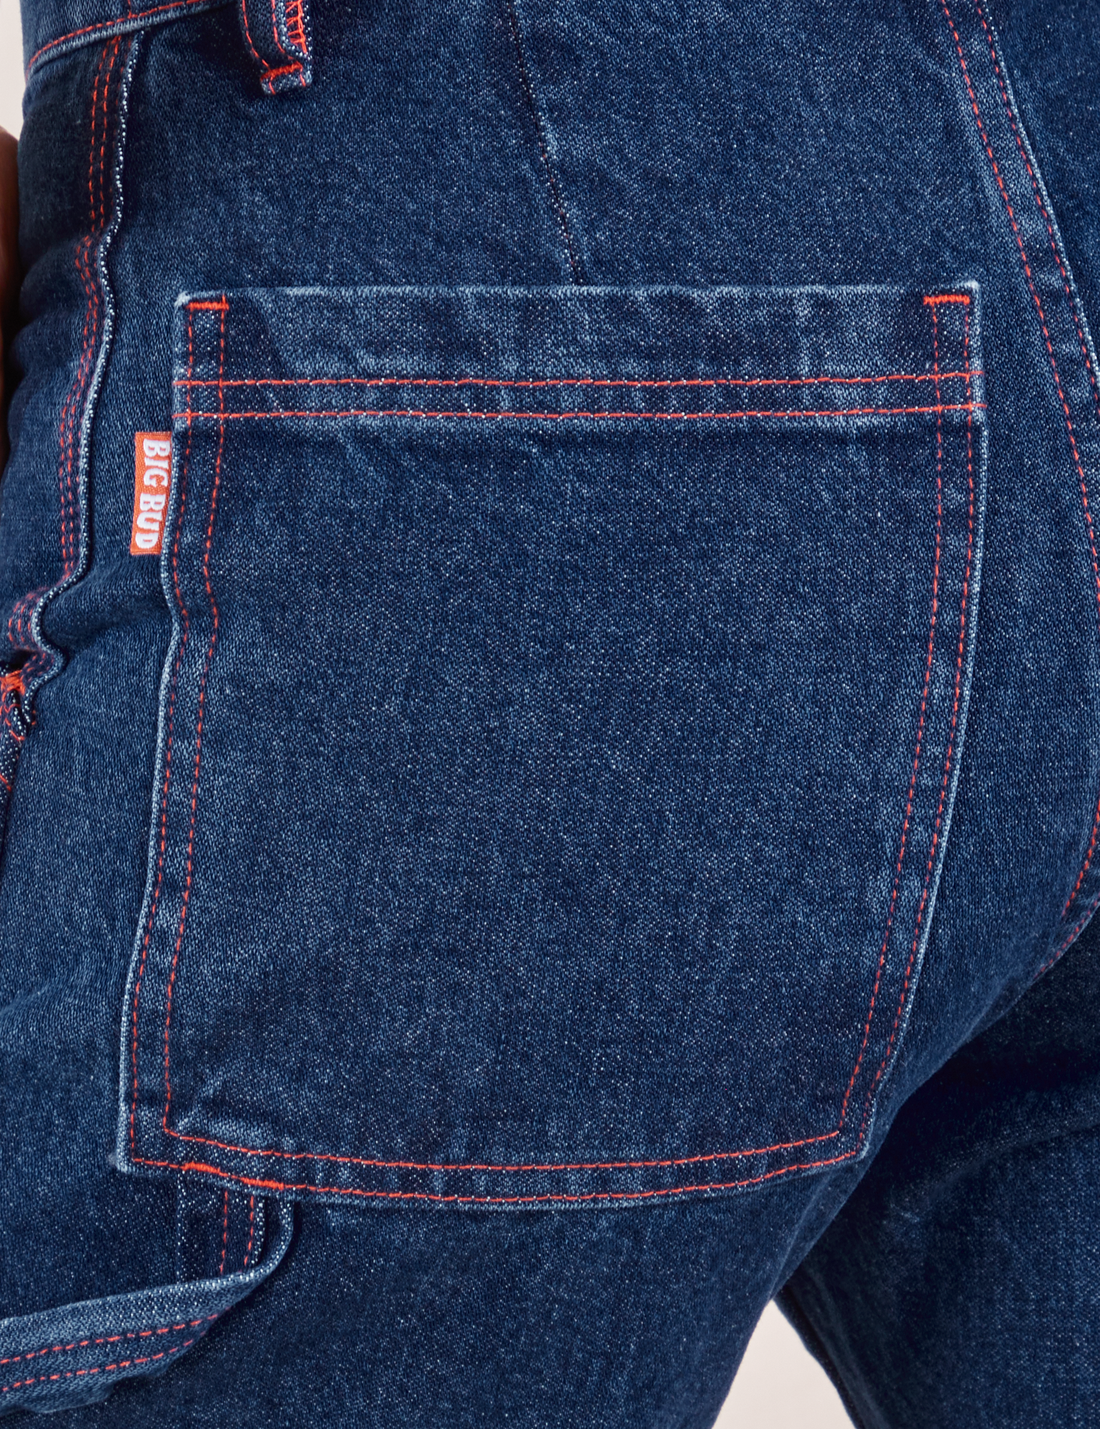 Carpenter Jeans in Dark Wash back pocket close up. Red contrast stitching on pocket and near seams.